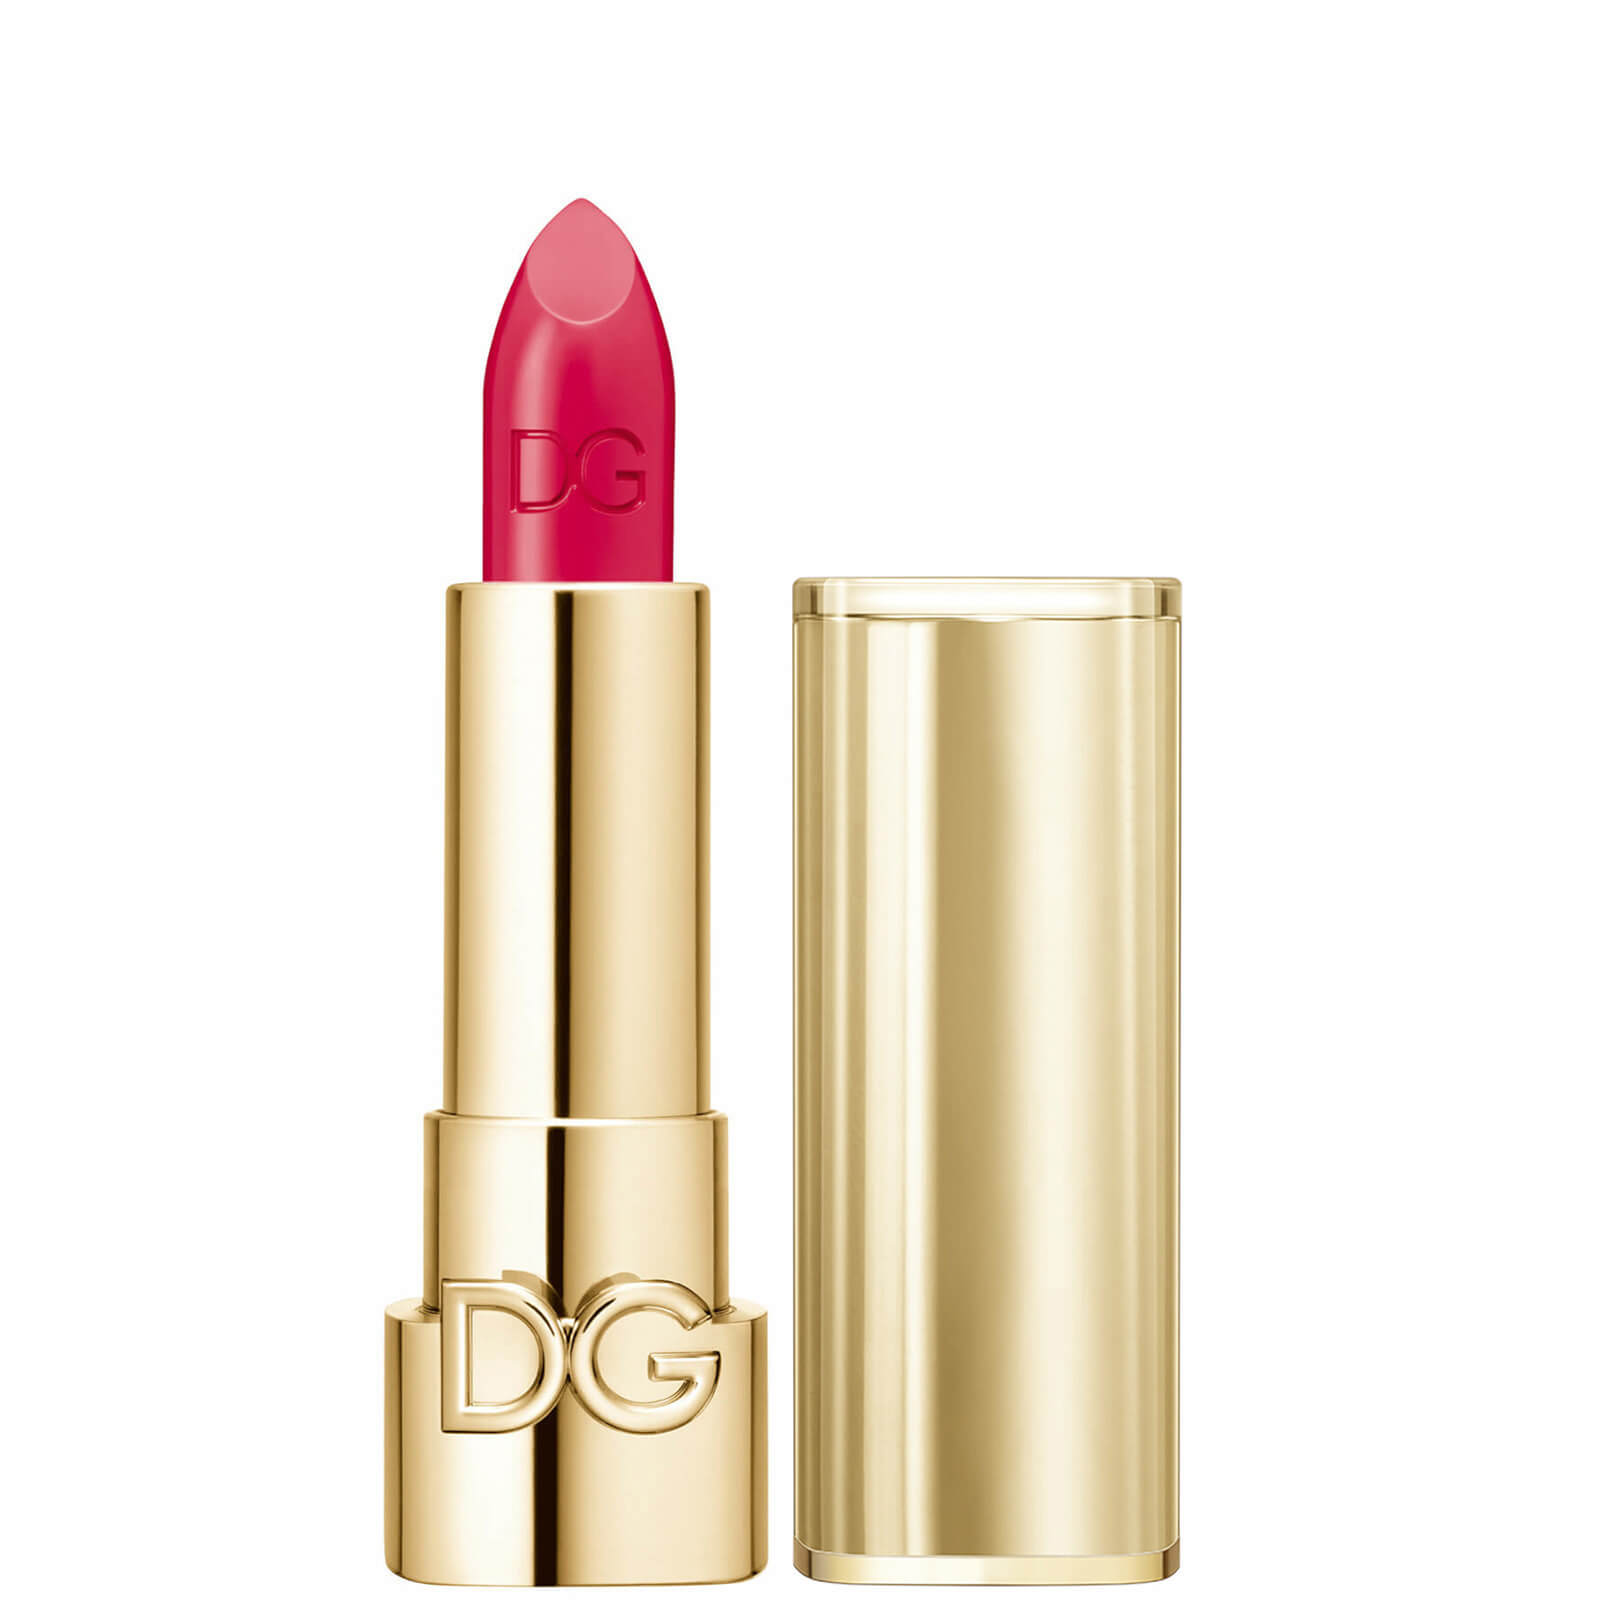 Dolce&Gabbana The Only One Lipstick + Cap (Gold) (Various Shades) - 250 Gummy Berry